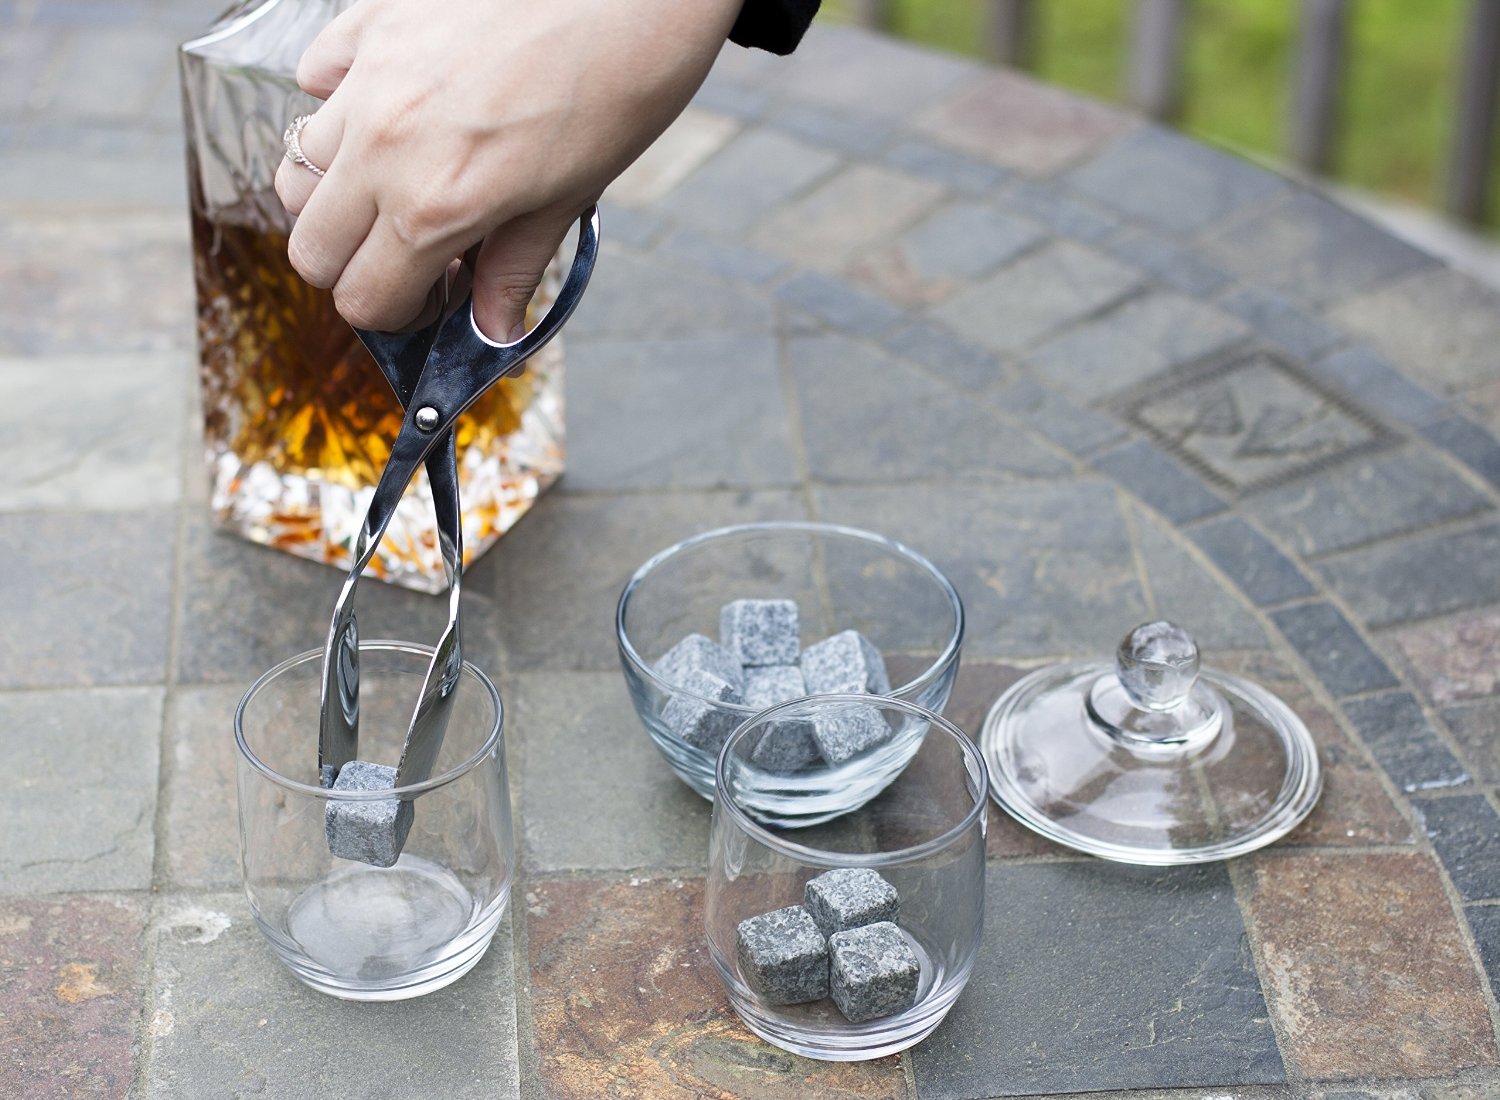 Why Should We Use Whiskey Stones Instead Of Ice?